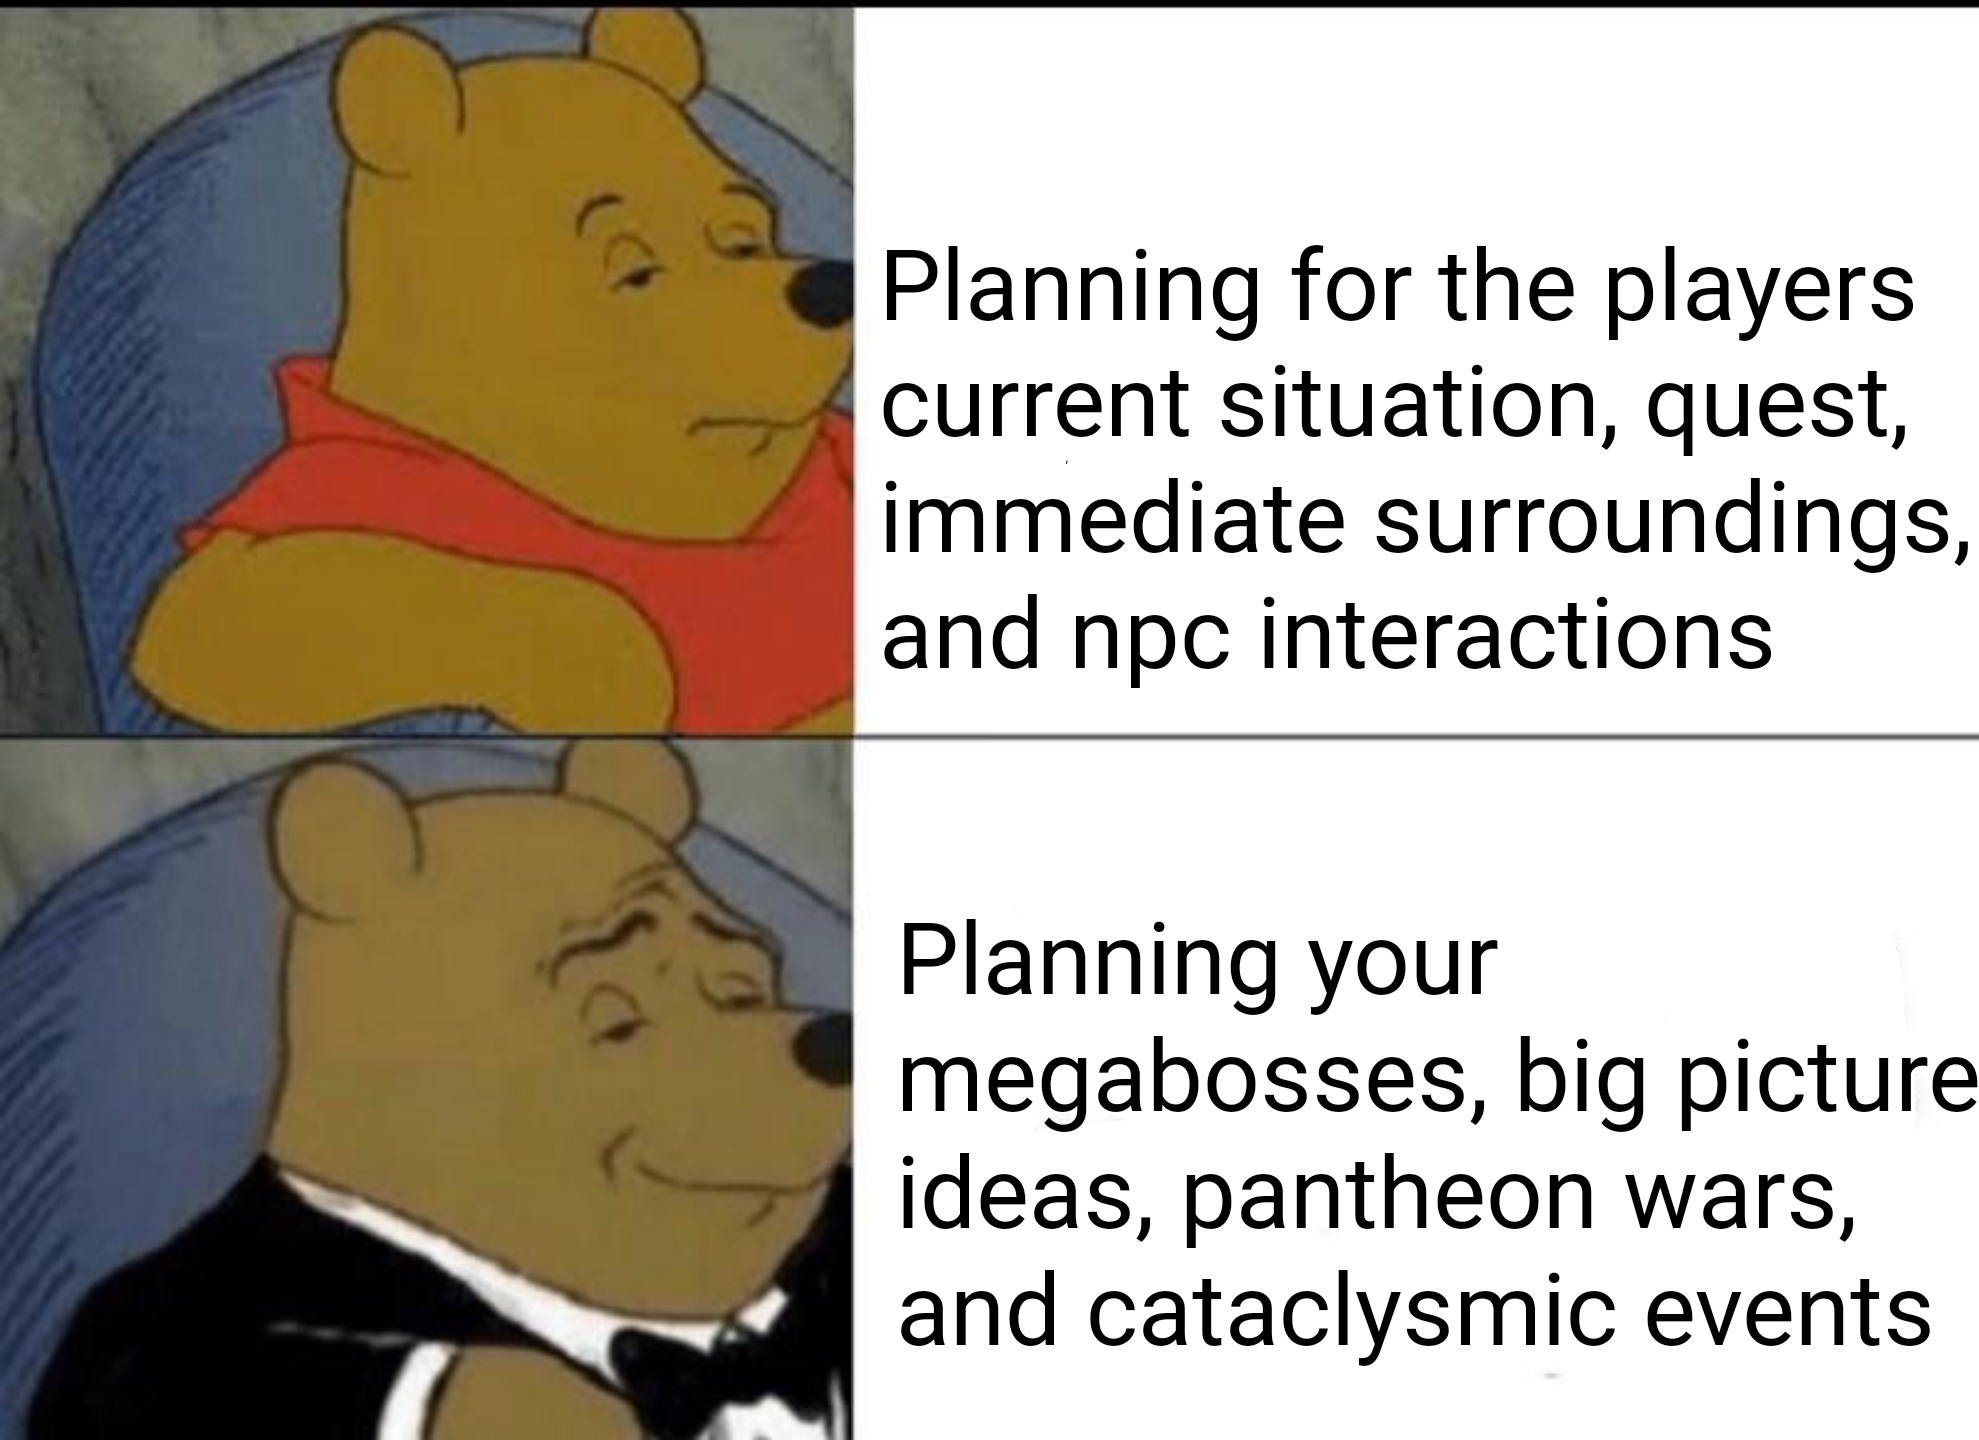 winnie the pooh memes fancy - Planning for the players current situation, quest, immediate surroundings, and npc interactions Planning your megabosses, big picture ideas, pantheon wars, and cataclysmic events